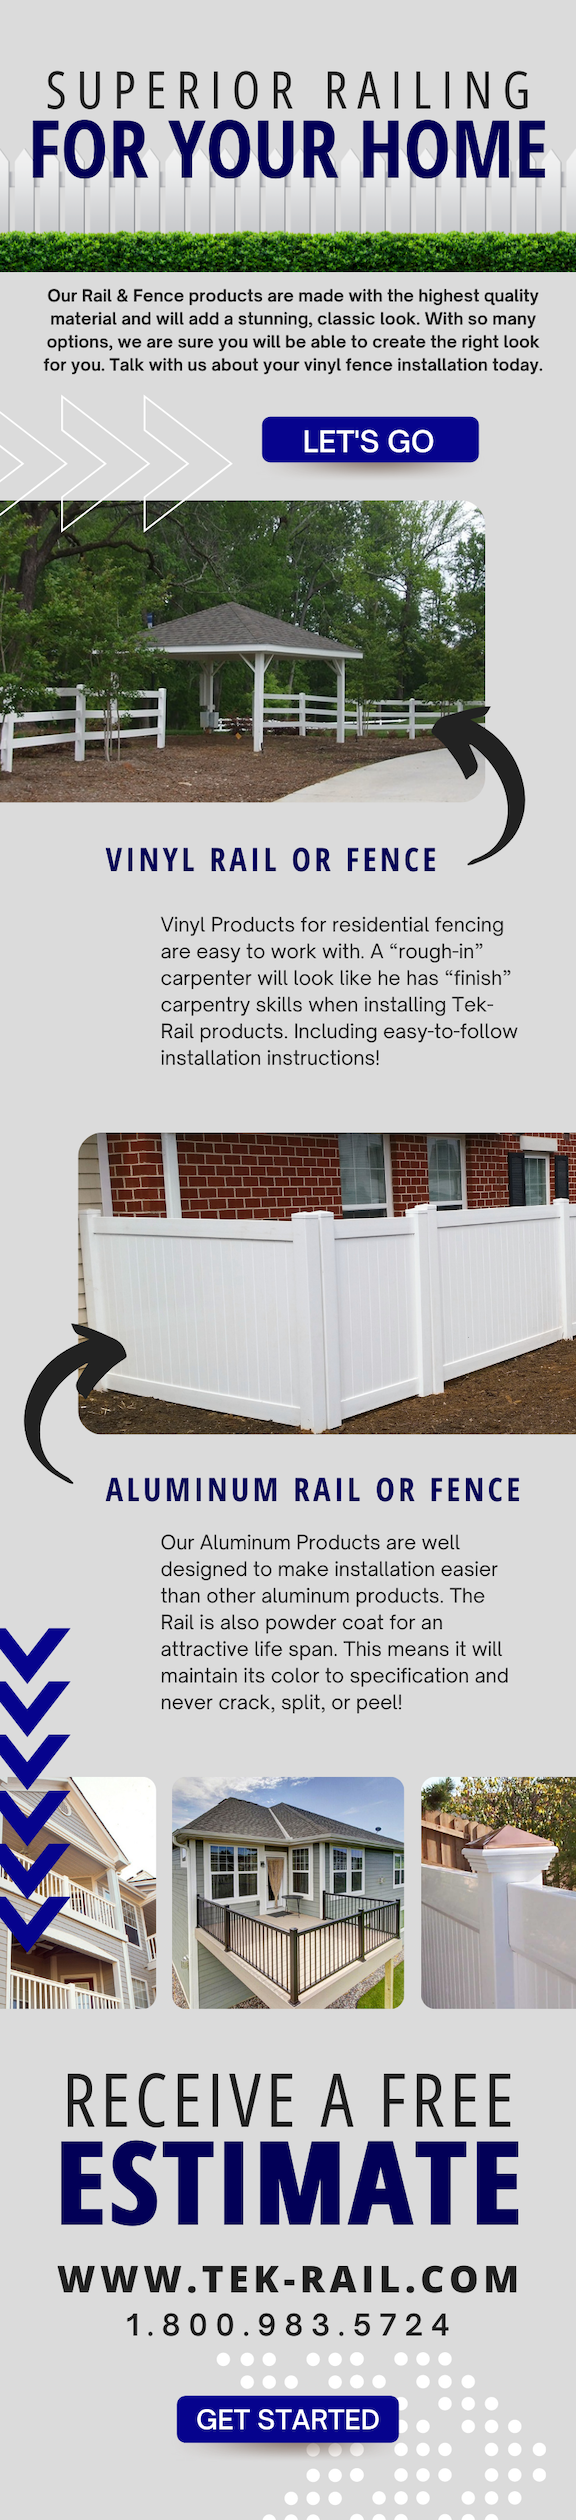 Superior Railing For Your Home